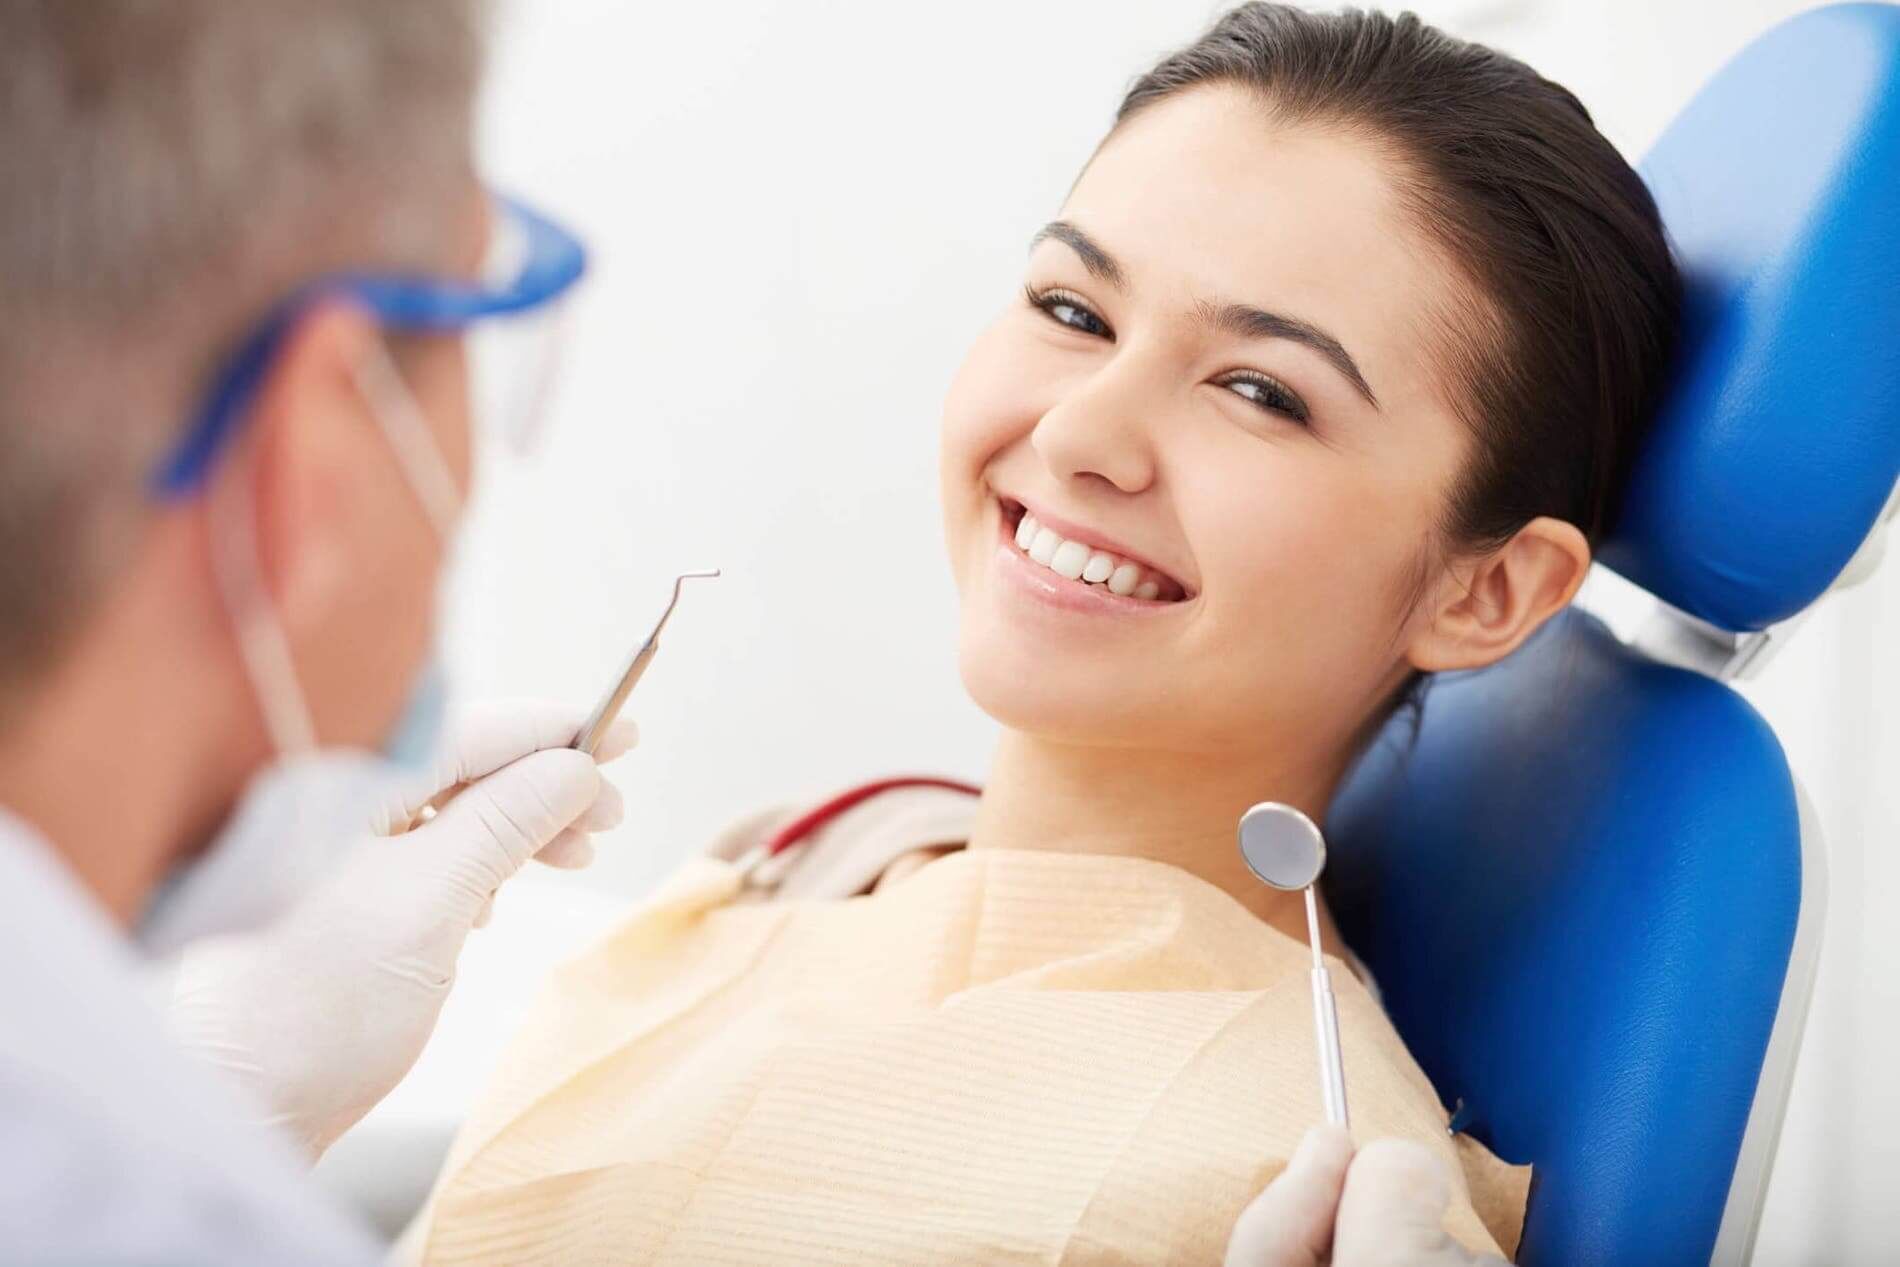 How Much Is Teeth Whitening at the Dentist with Insurance?